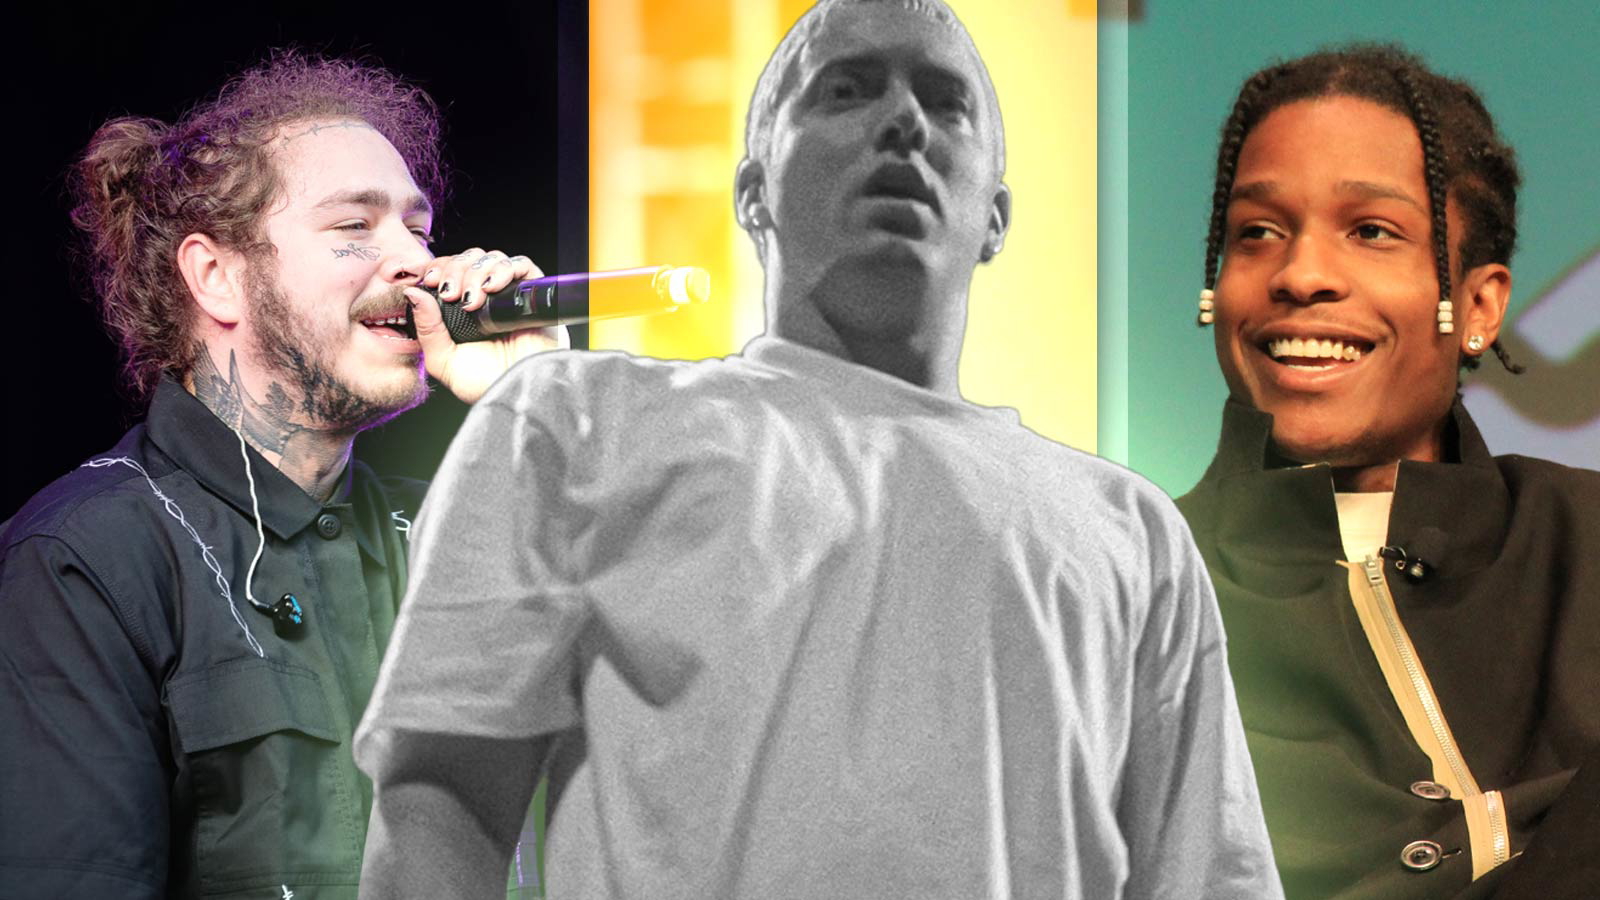 Eminem’s Massive Record With ‘The Death of Slim Shady’ Will Pose a Serious Challenge For Both Post Malone and A$AP Rocky- Here’s Why